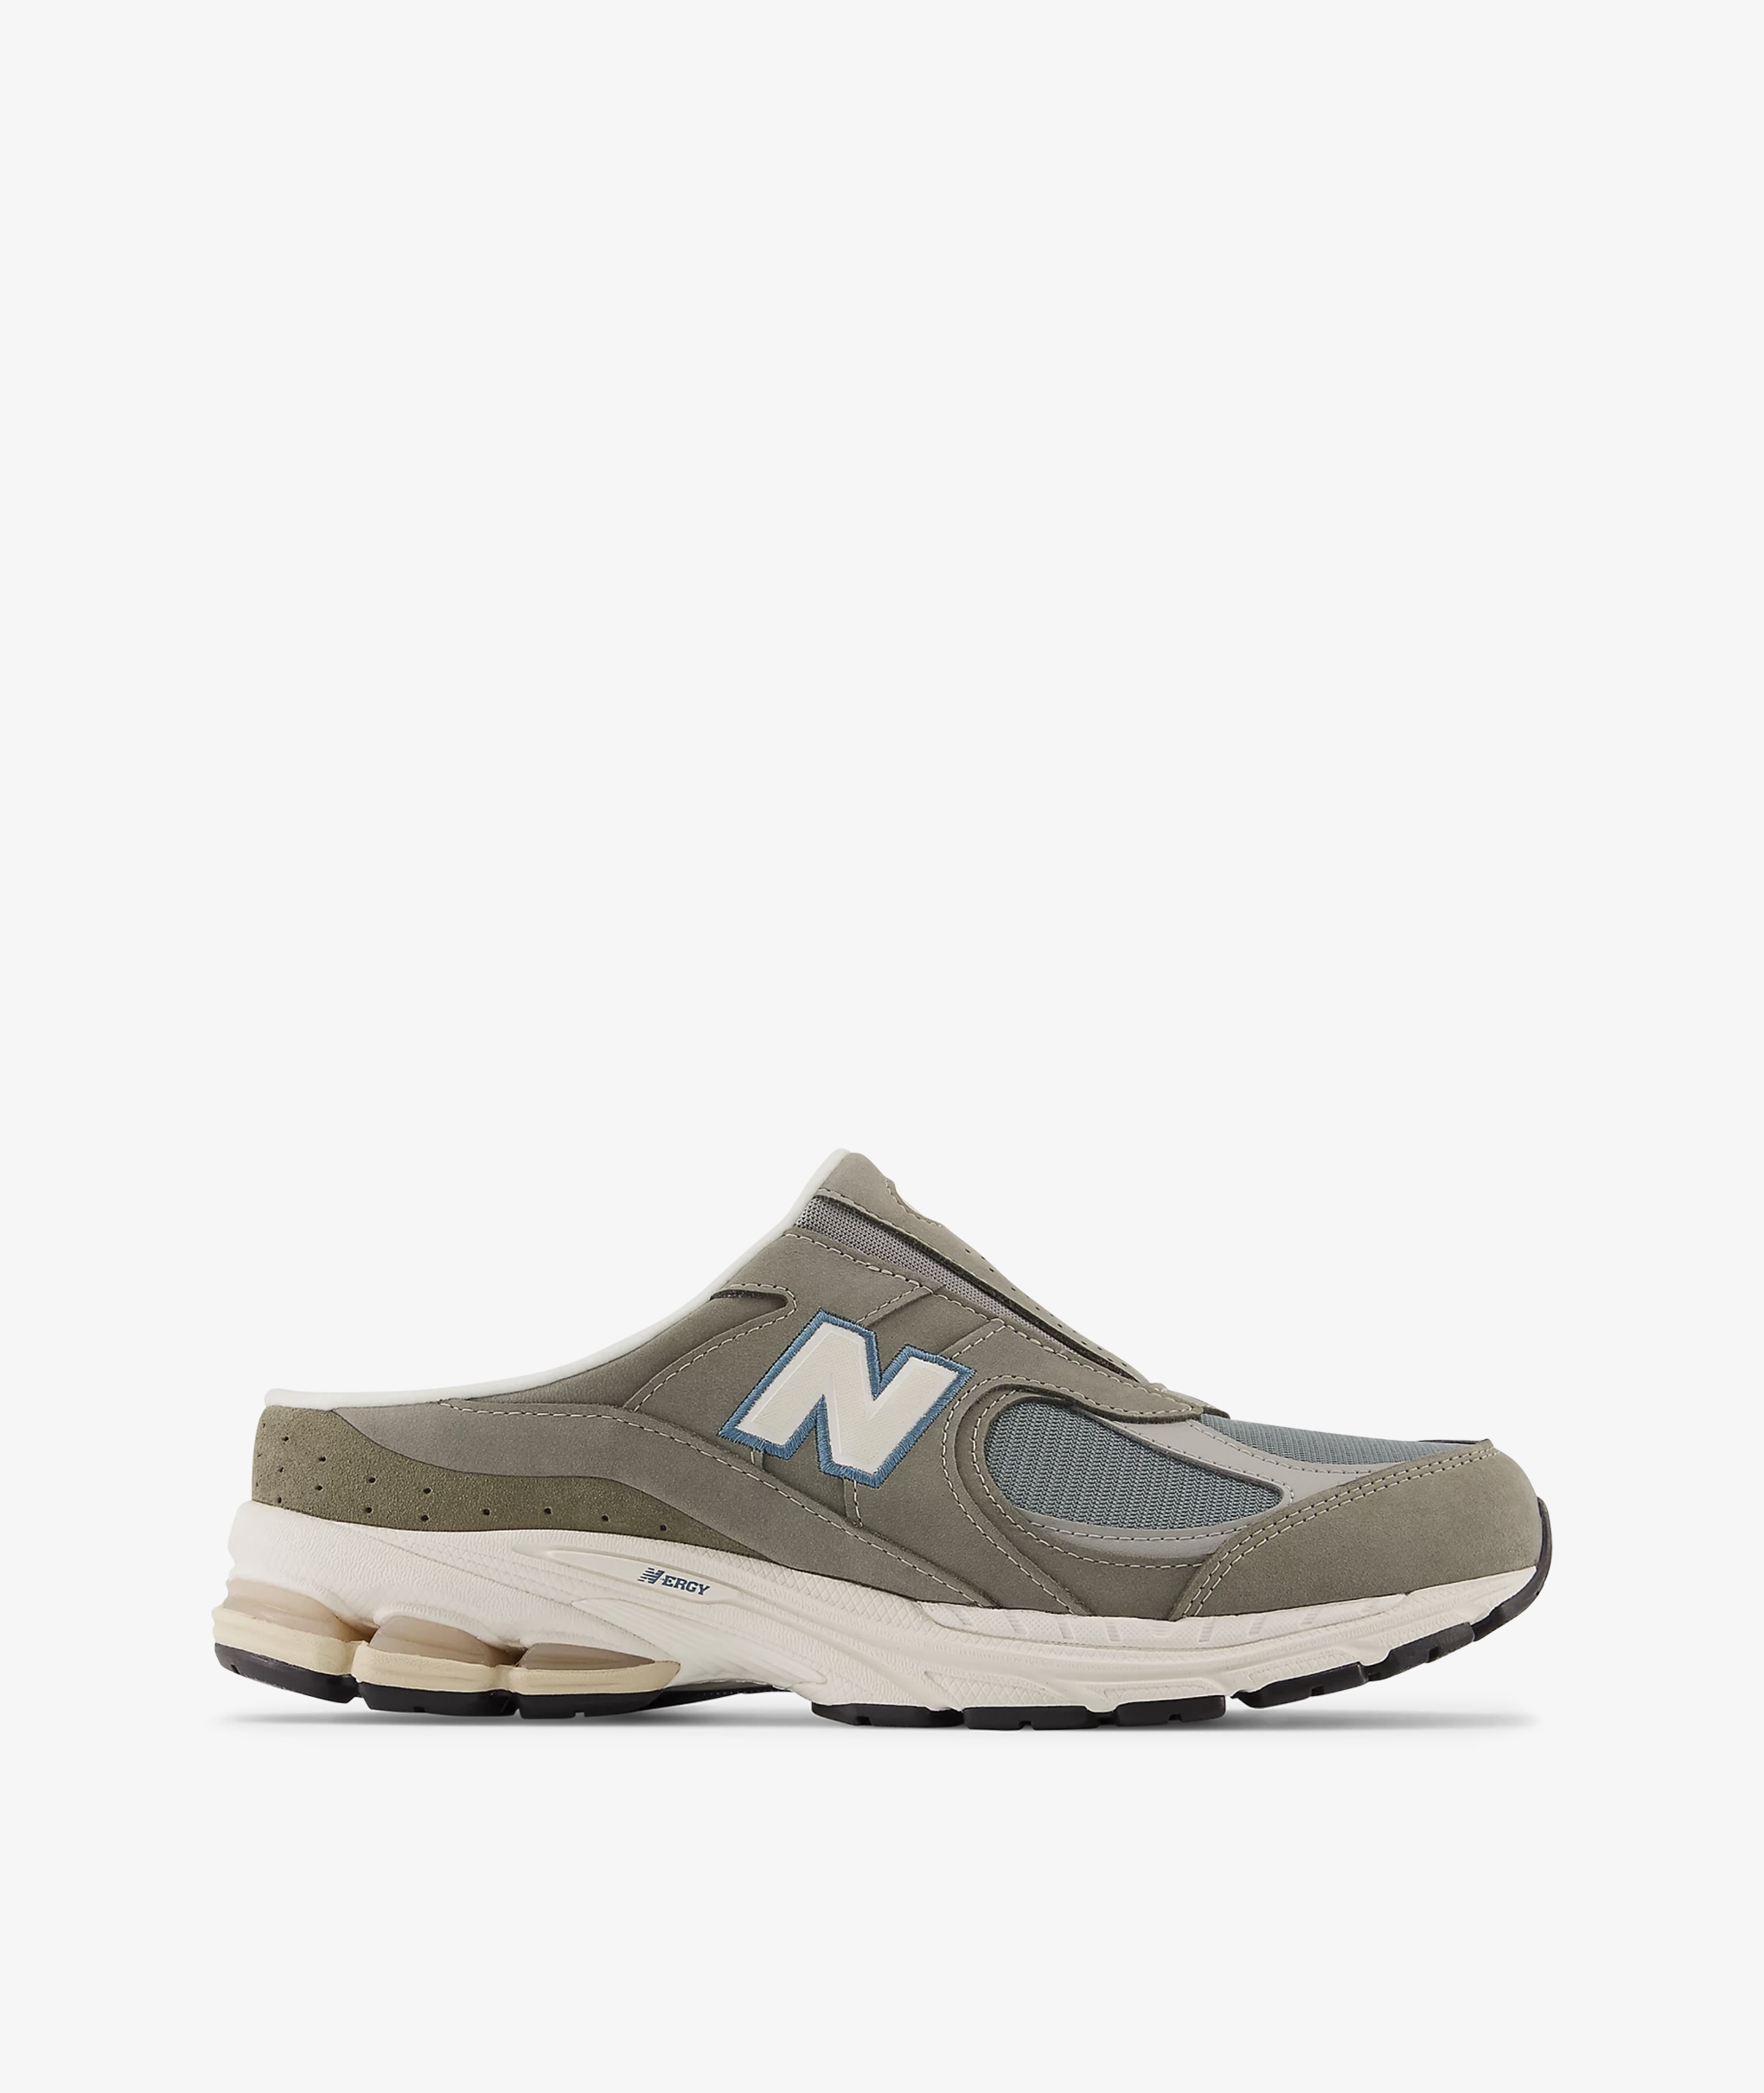 Norse Store | Shipping Worldwide - New Balance M2002RMK - MARBLEHEAD ...